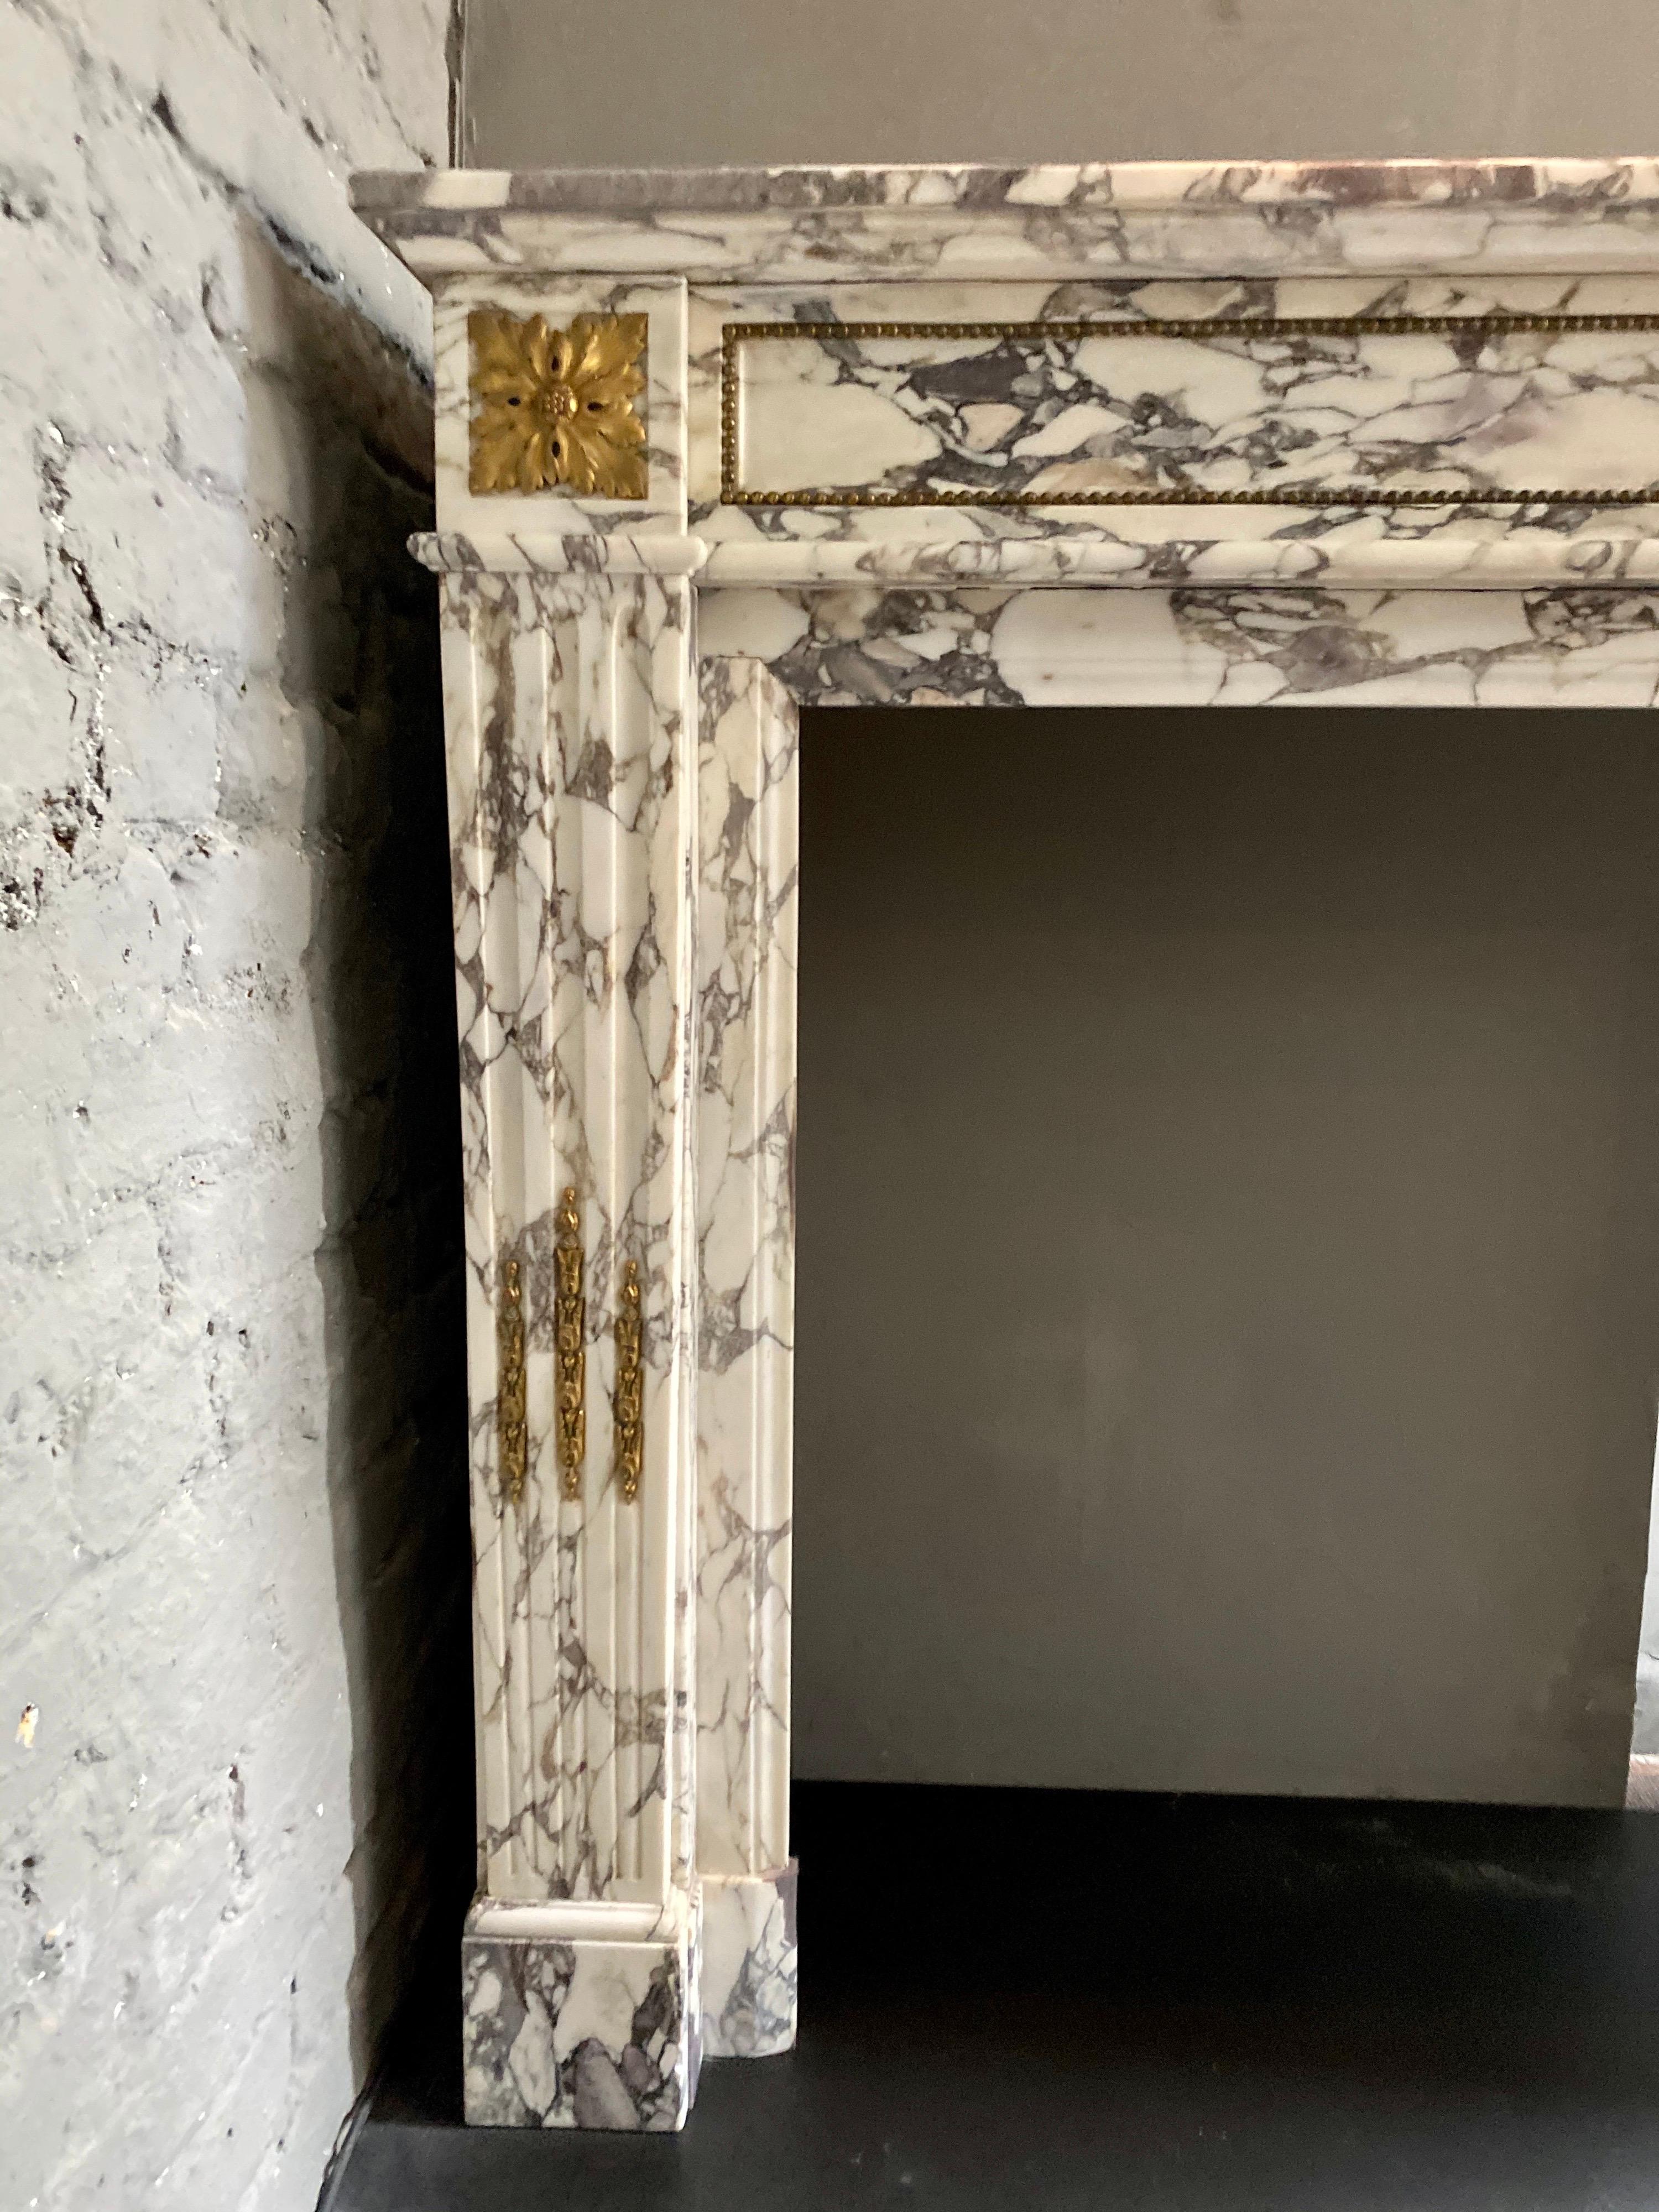 A superior quality antique French surround in rare Breche Violette marble, with Ormolu mounts. The stop fluted jambs with Ormolu Husks and surmounted by Ormolu Patarae. The panelled frieze with beaded Ormolu running the length. A wide moulded inner